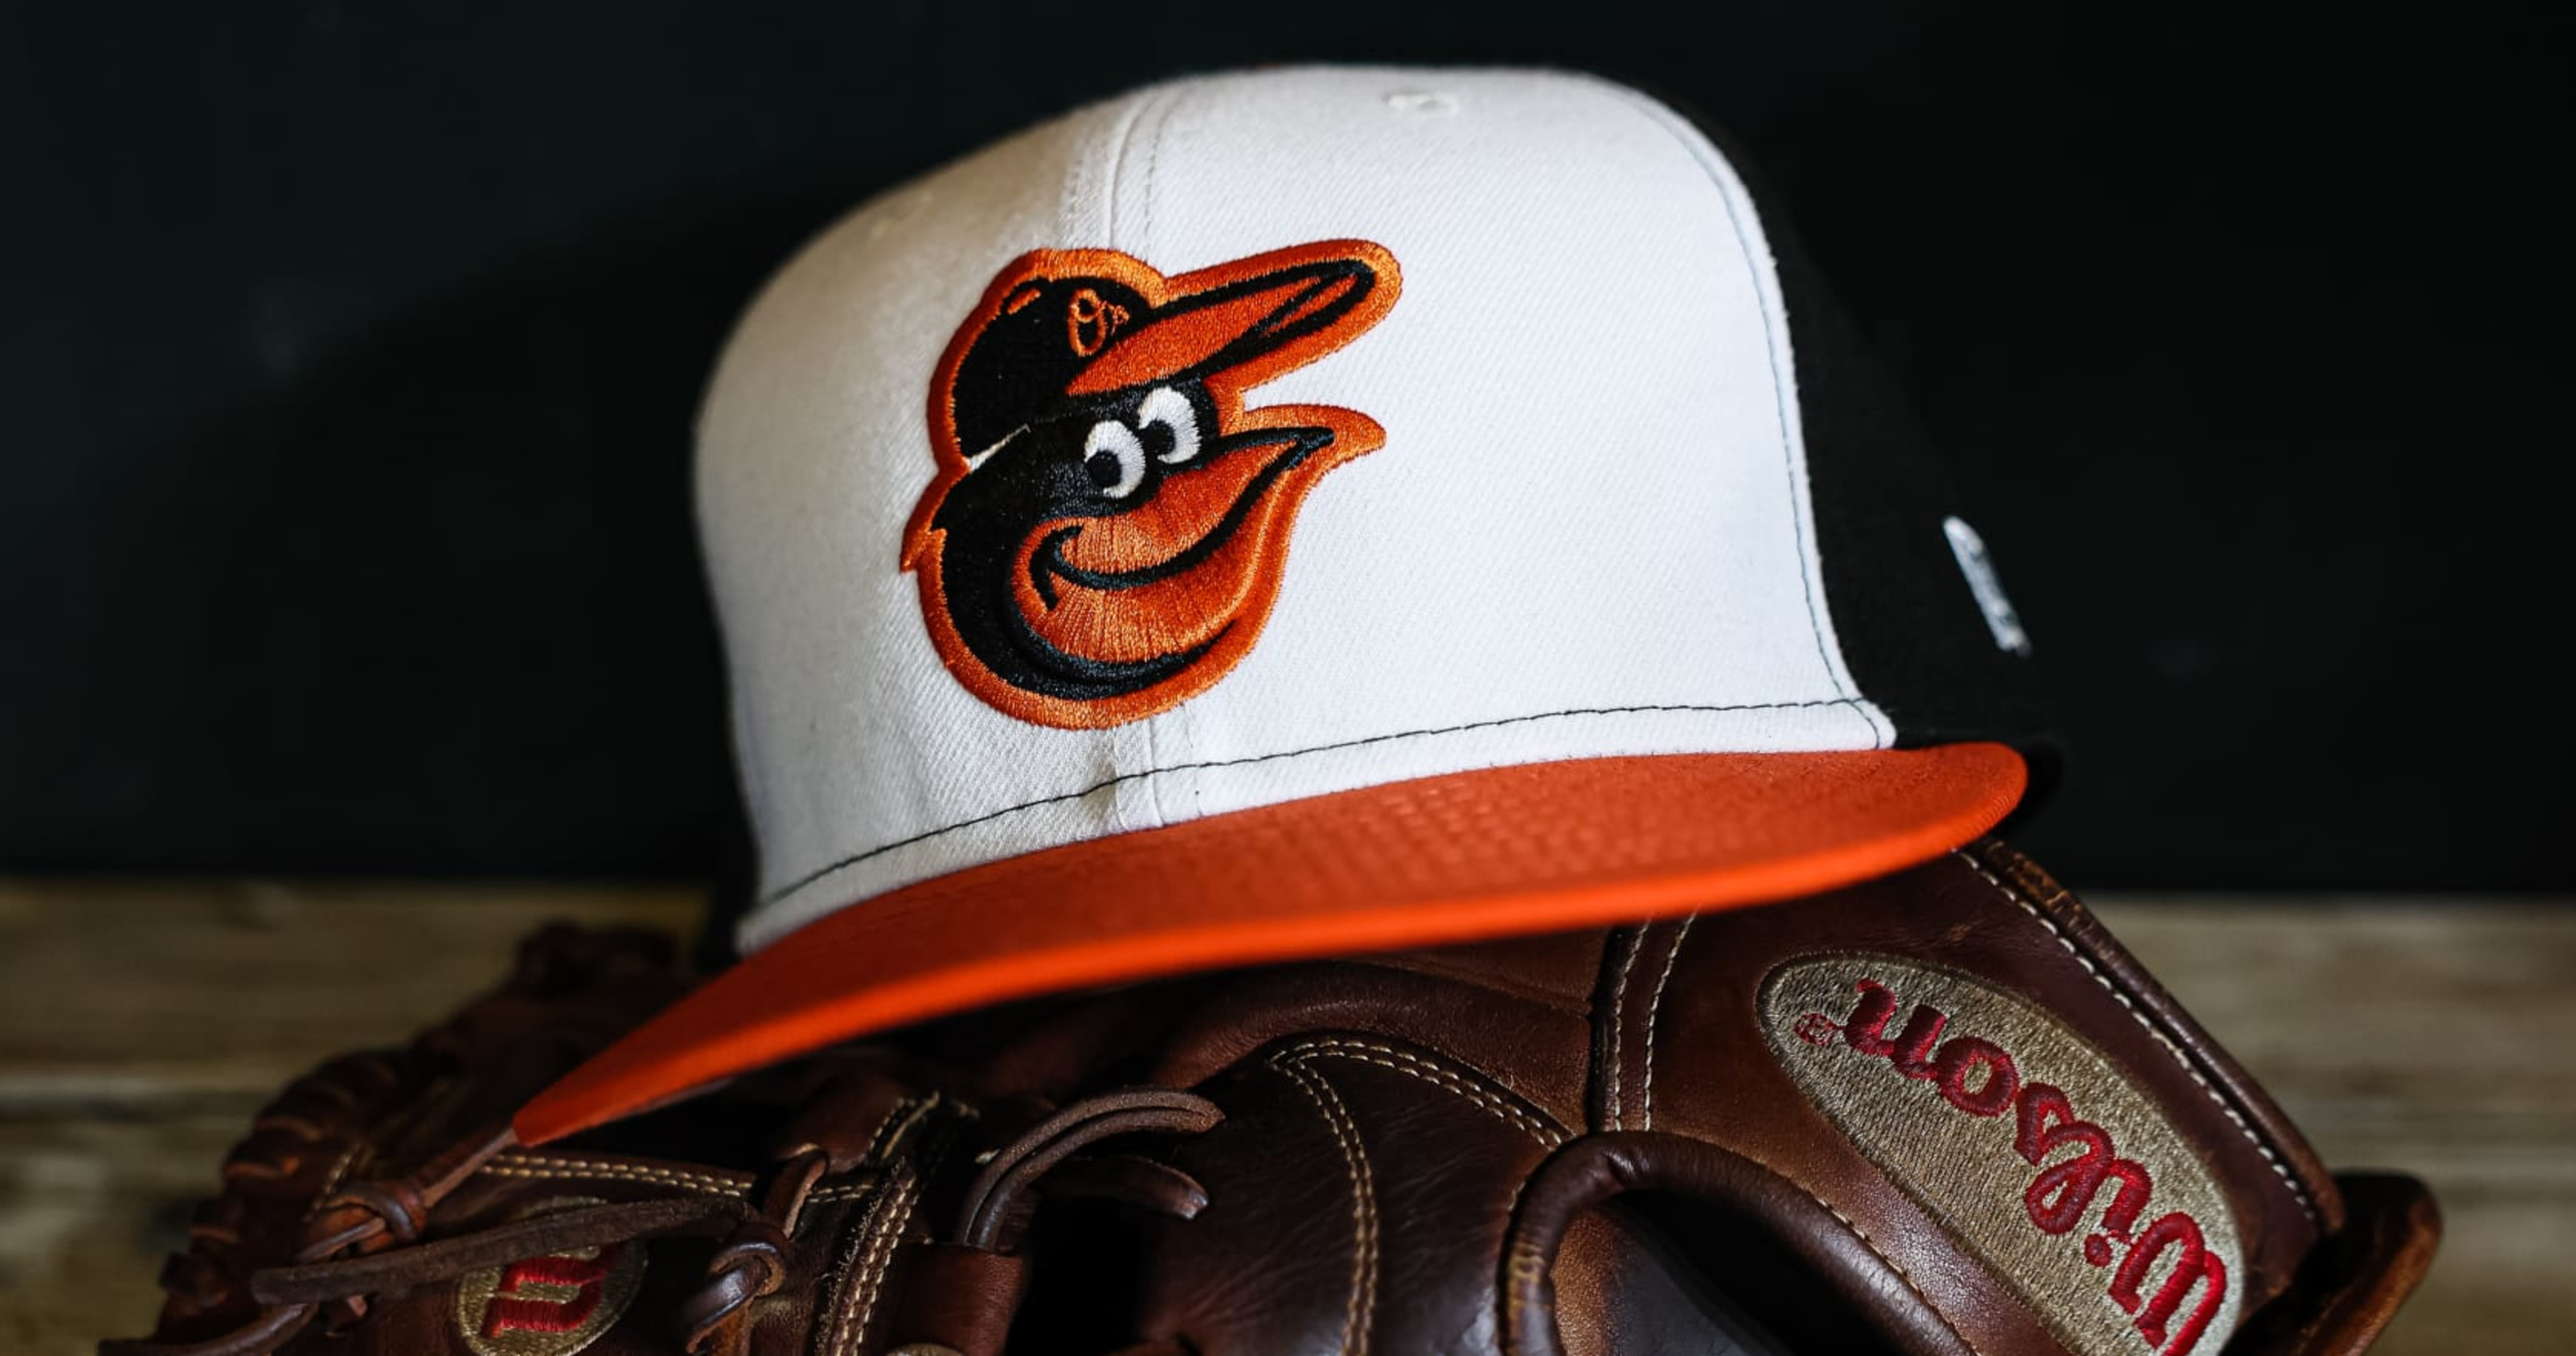 Orioles' Sale to David Rubenstein Unanimously Approved by MLB Owners